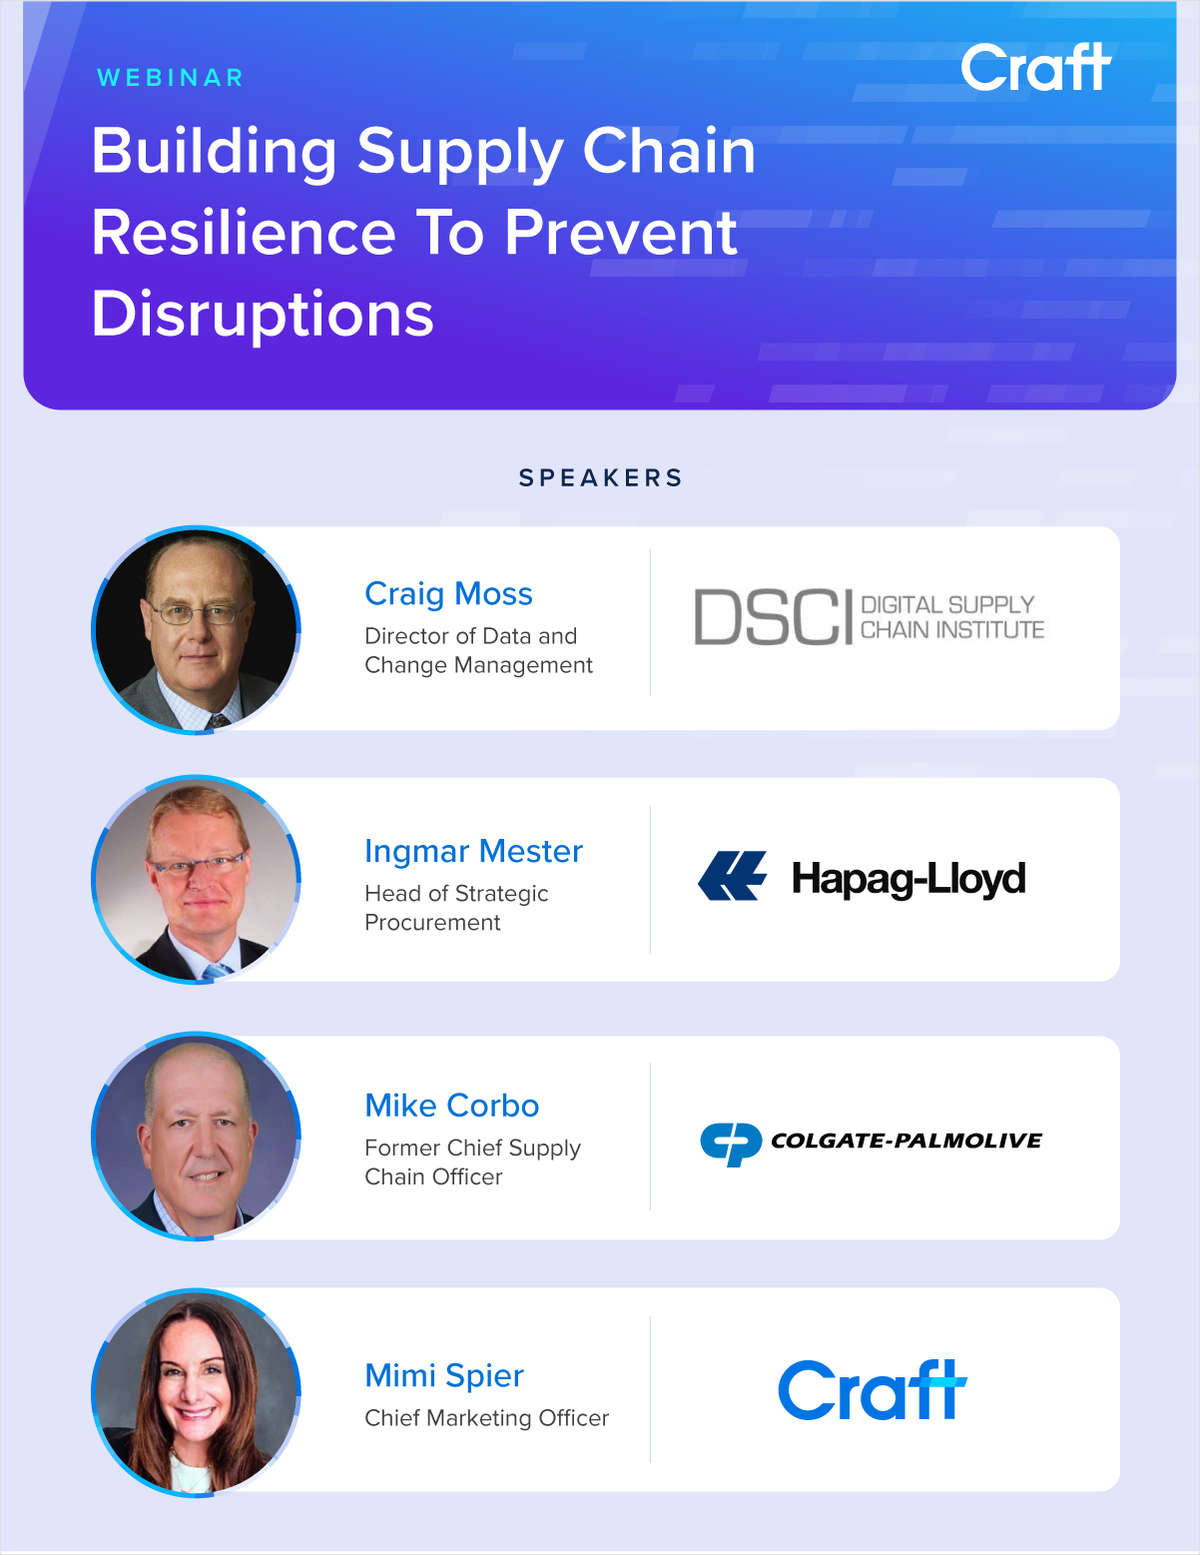 Building Supply Chain Resilience To Prevent Disruptions